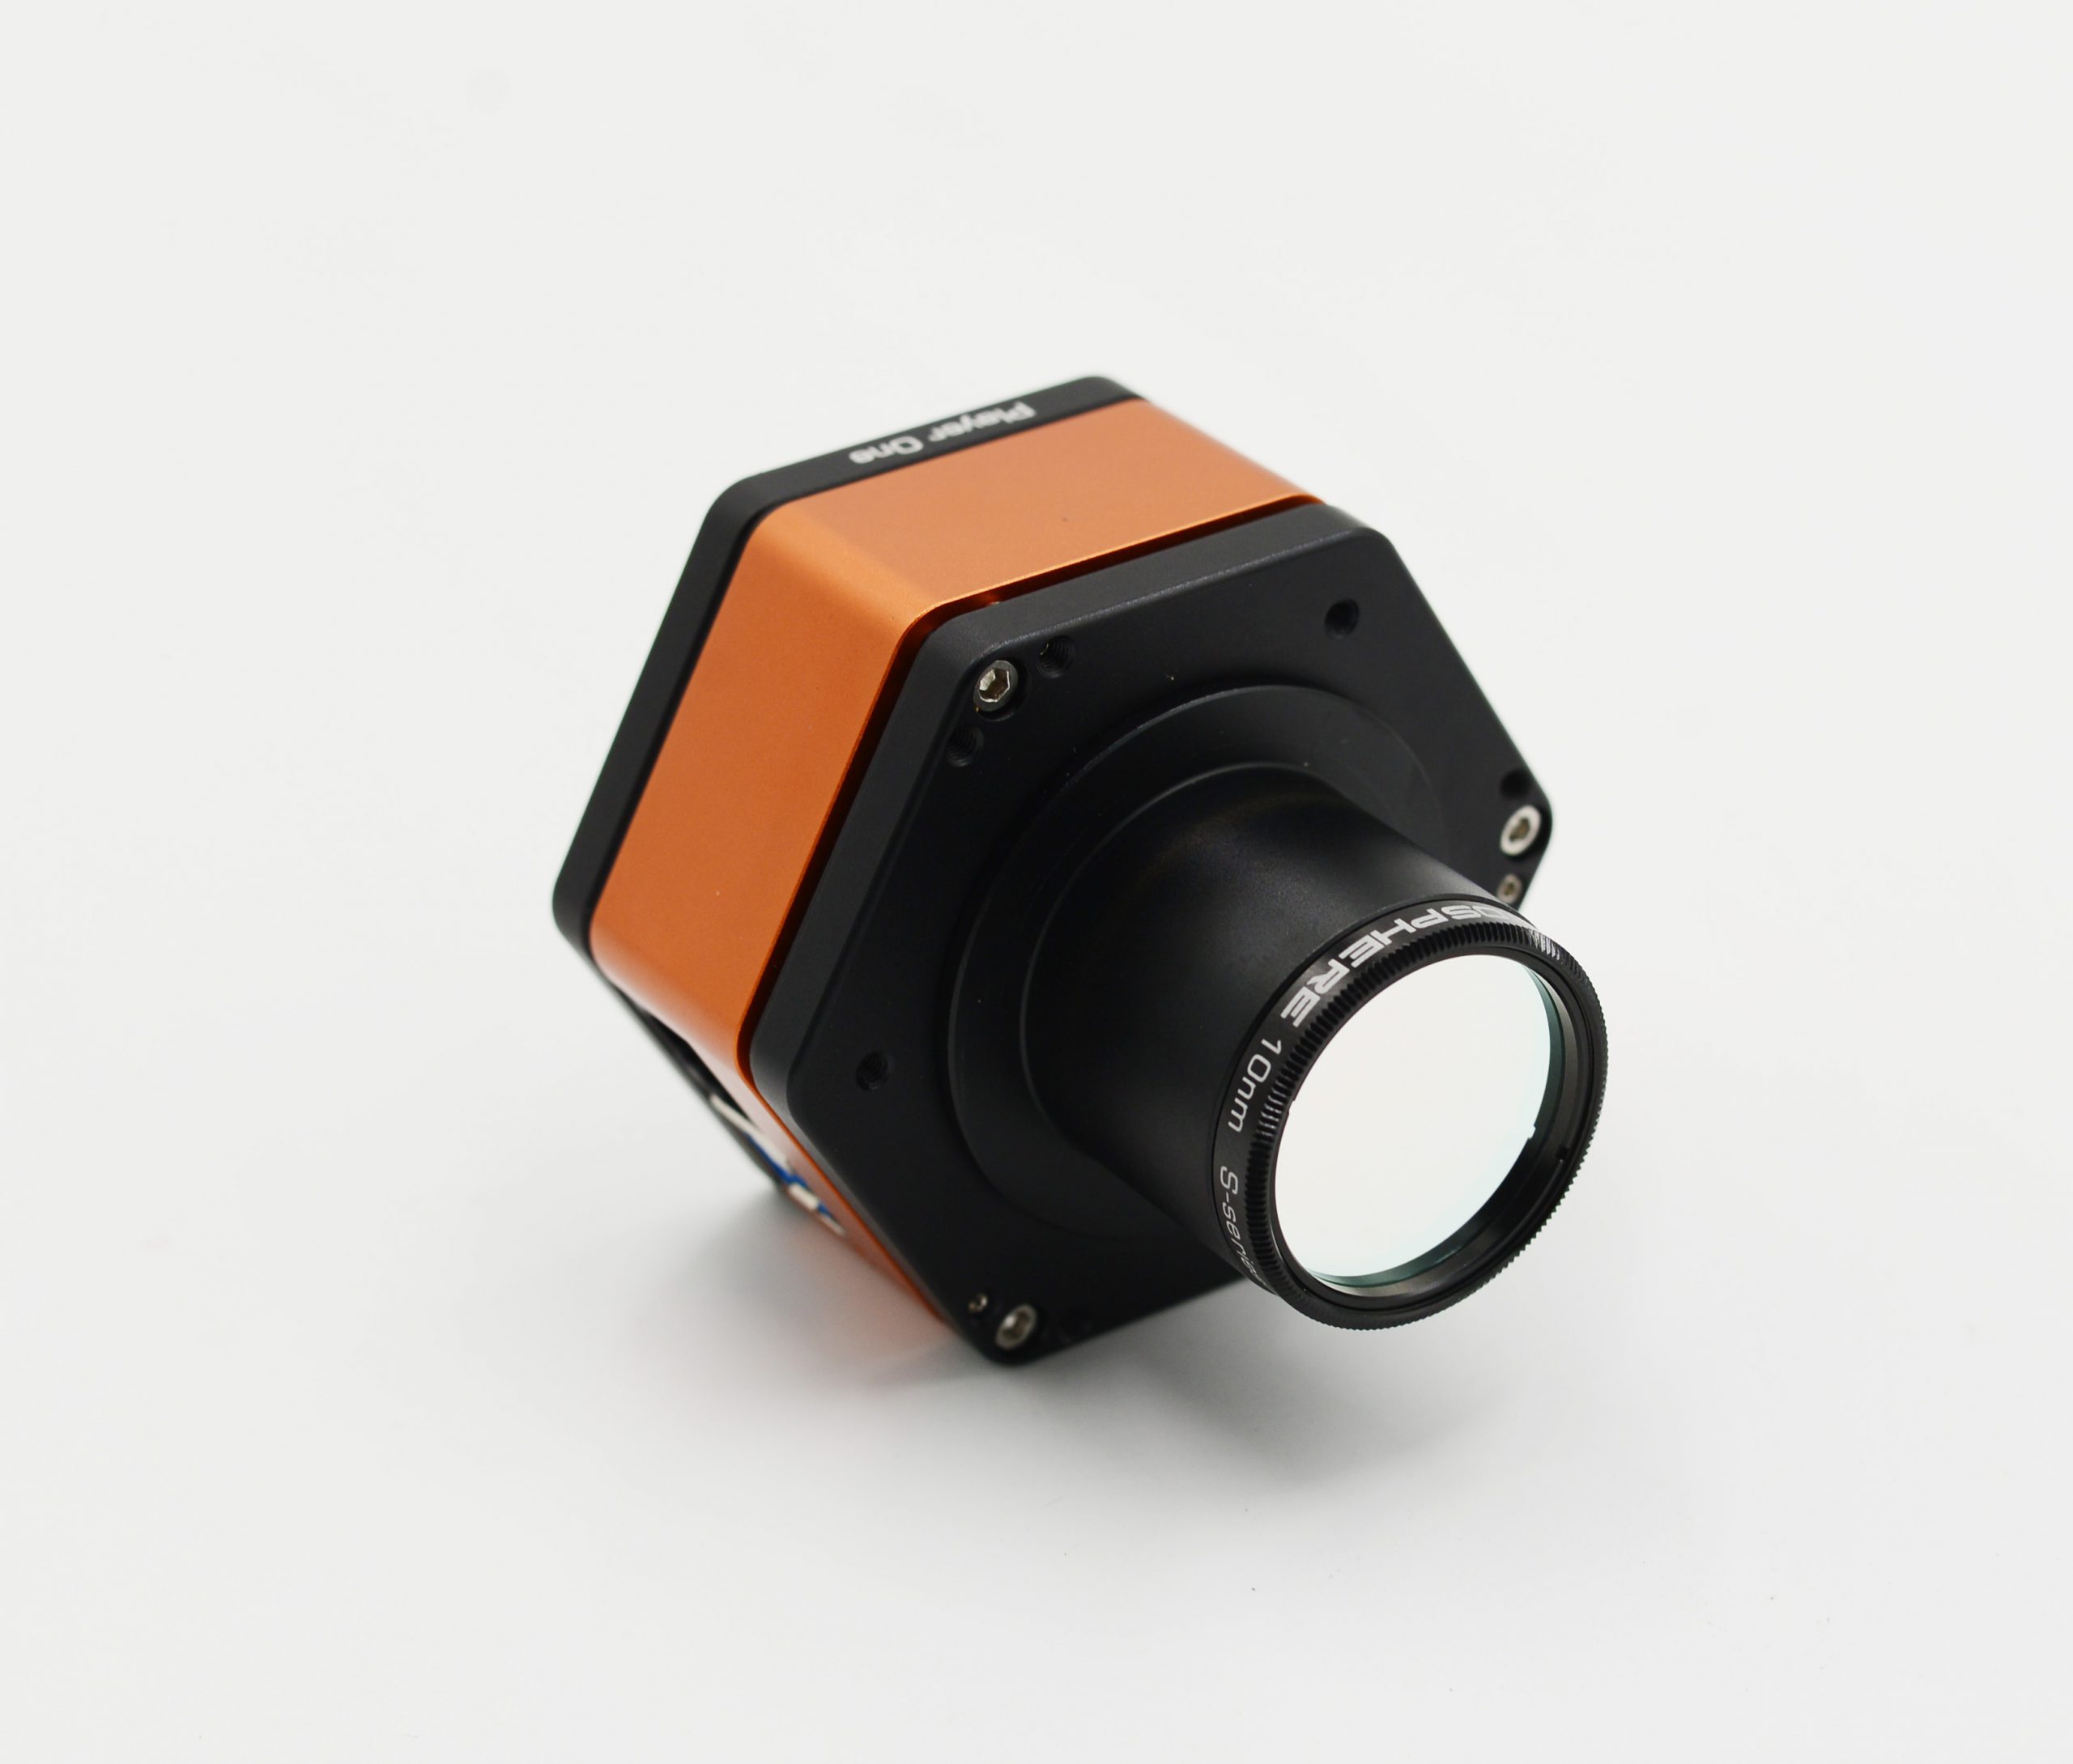   Apollo series is the world’s first camera line designed specifically for solar photography [EN]  